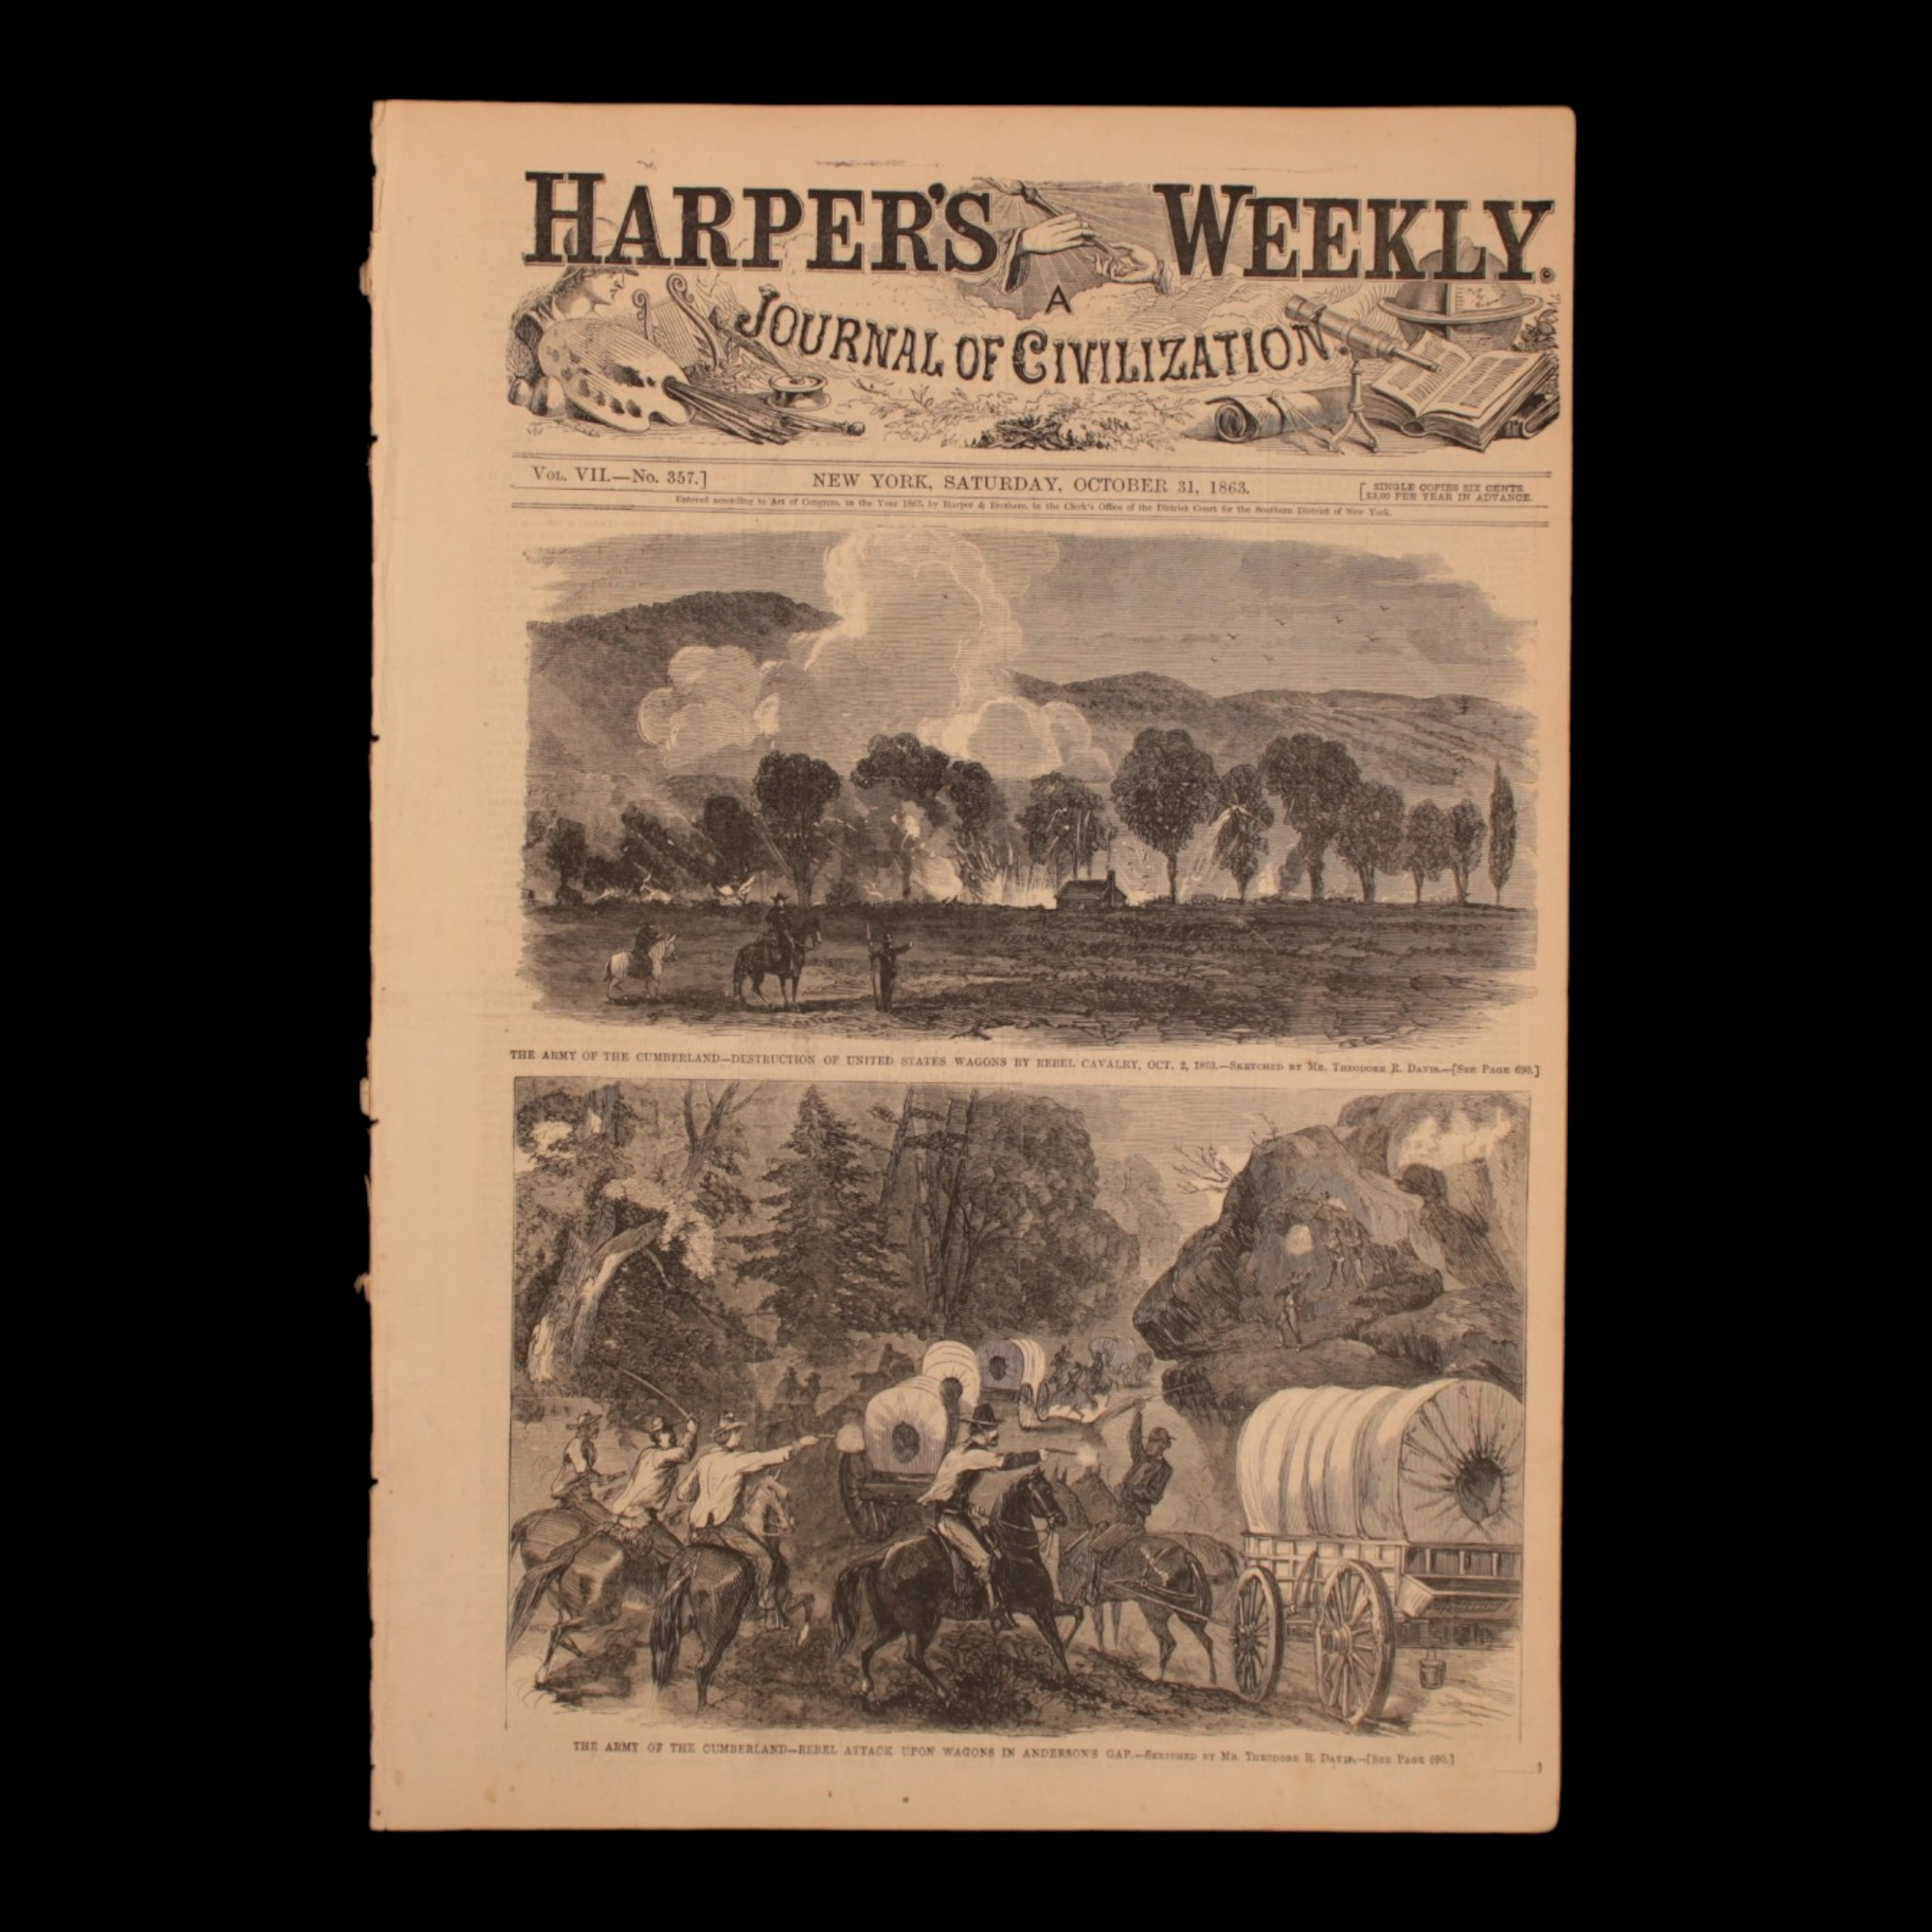 Harper's Weekly — Rebel Attack on Wagons, The Sioux War, Iconic Battle of Chicamauga Centerfold Engraving